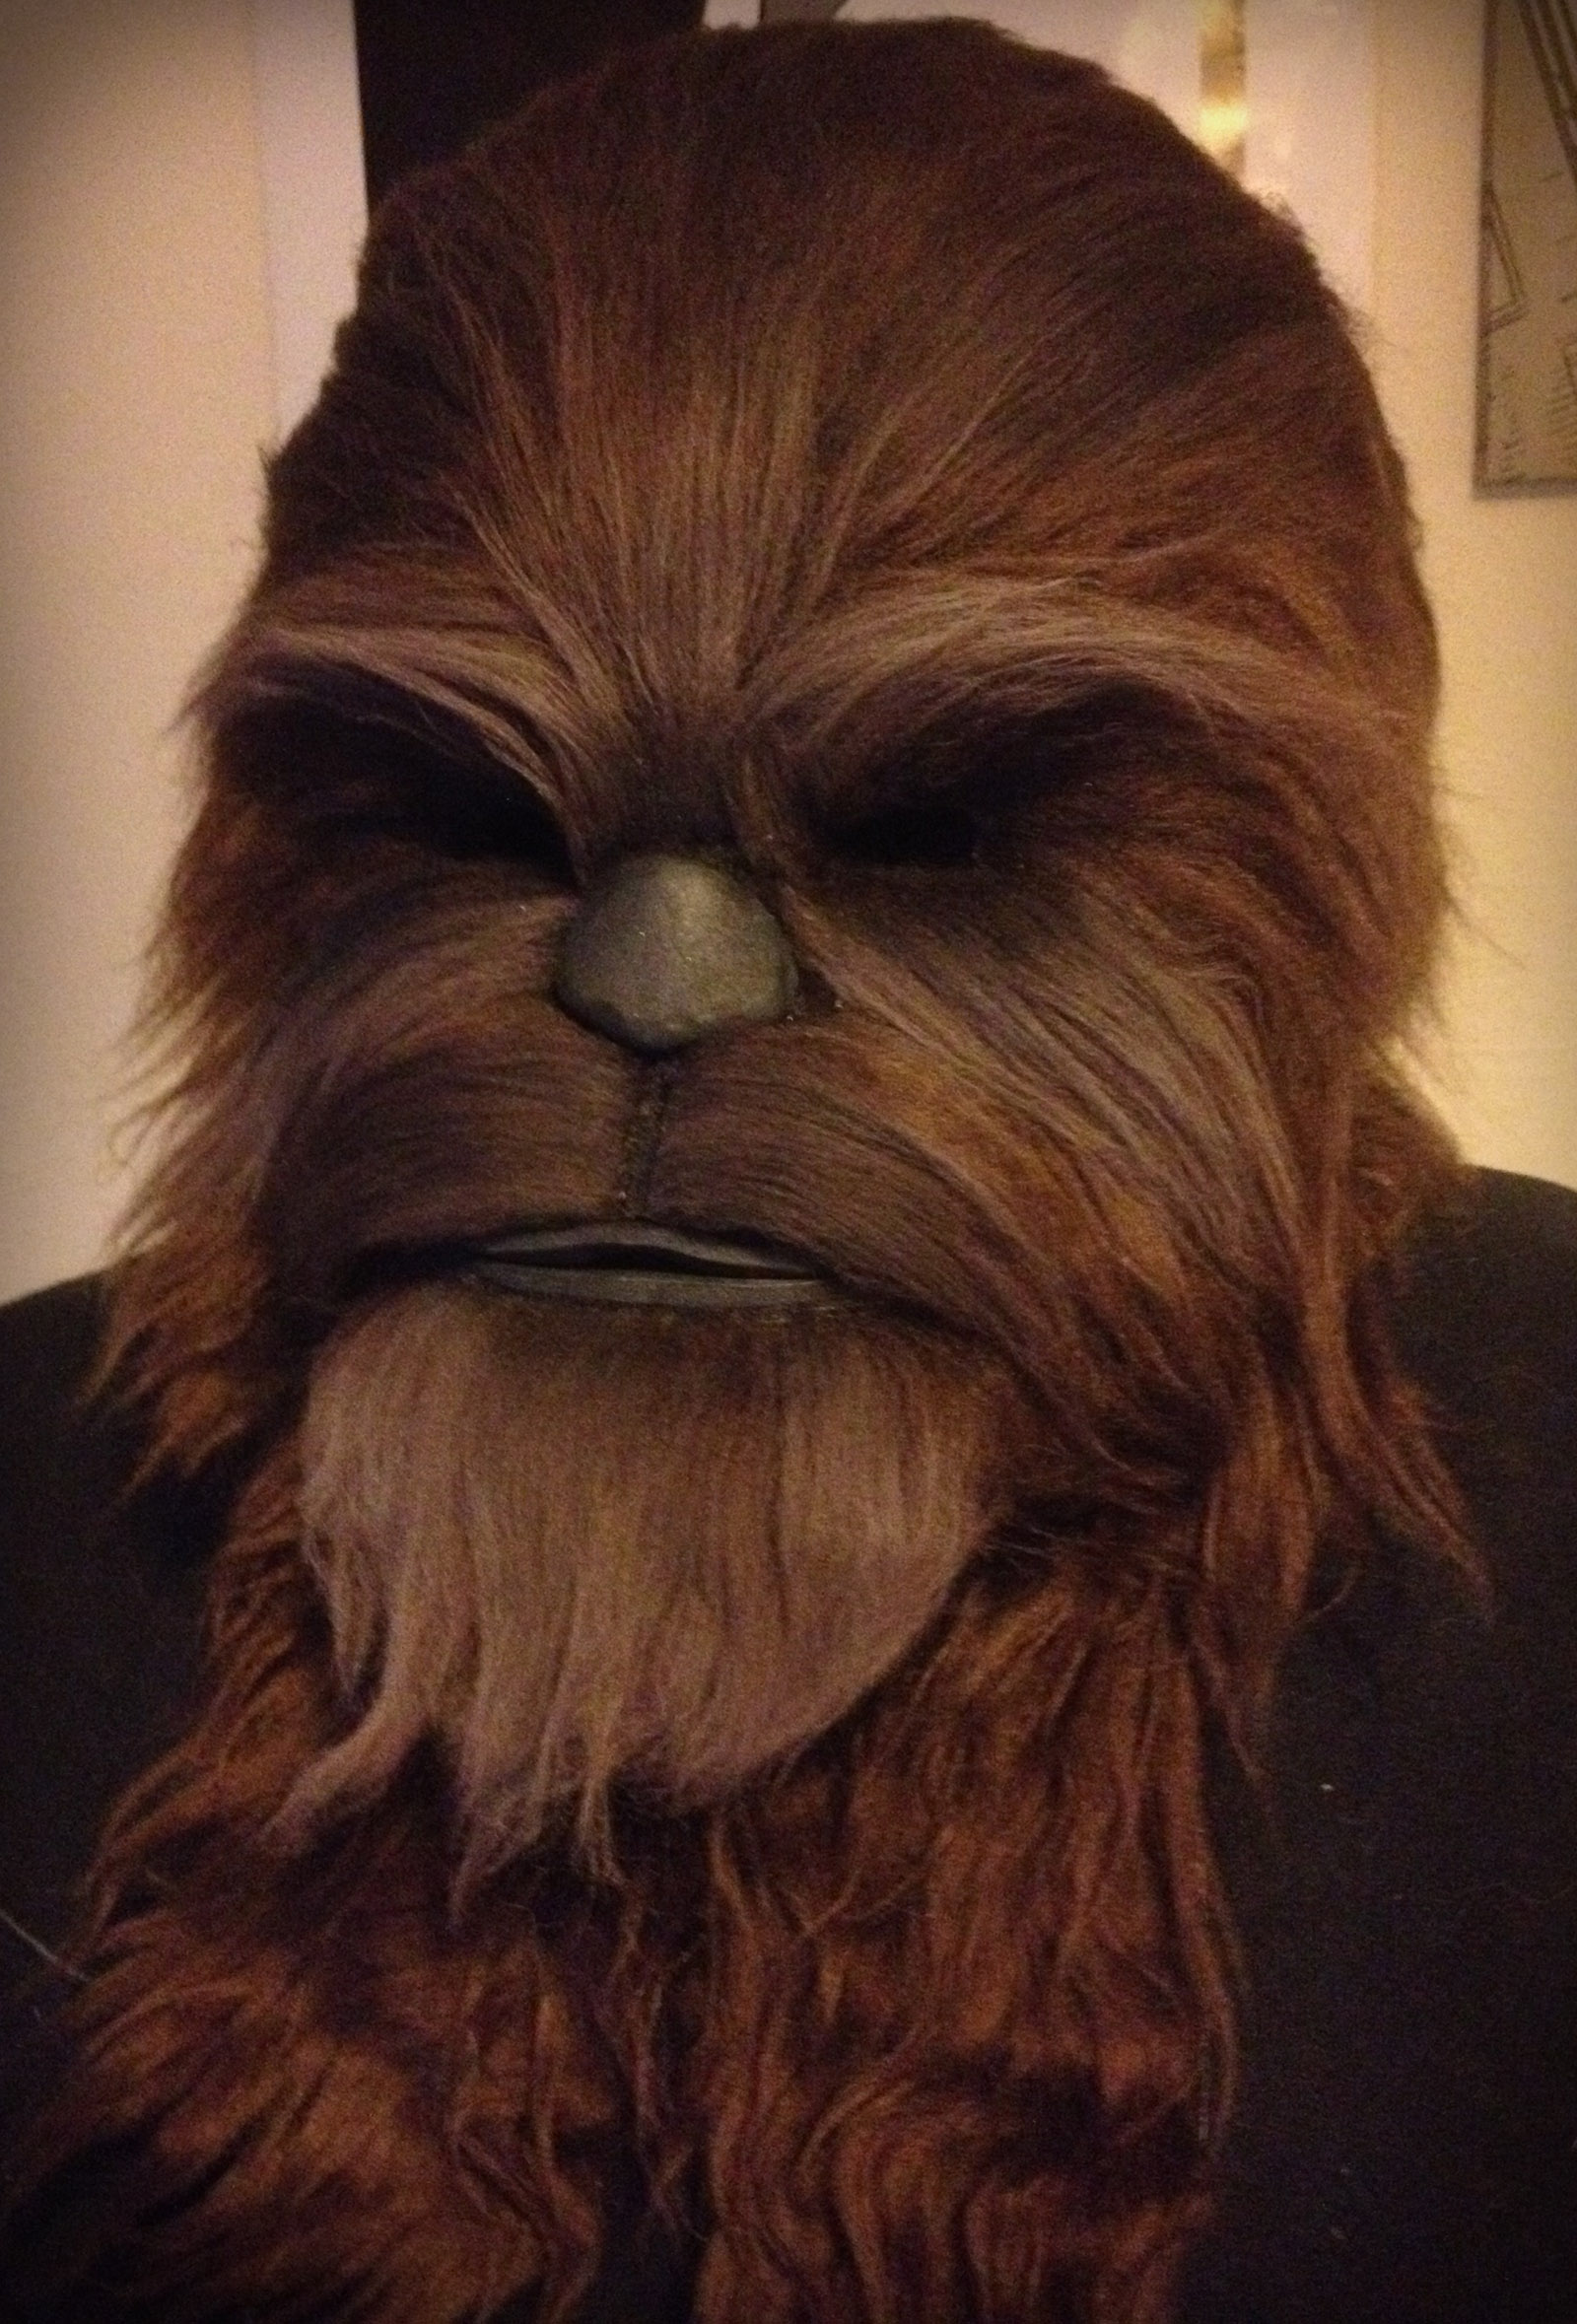 Will someone get this big walking carpet out of my way?" Chewbacca Costume  Build | RPF Costume and Prop Maker Community